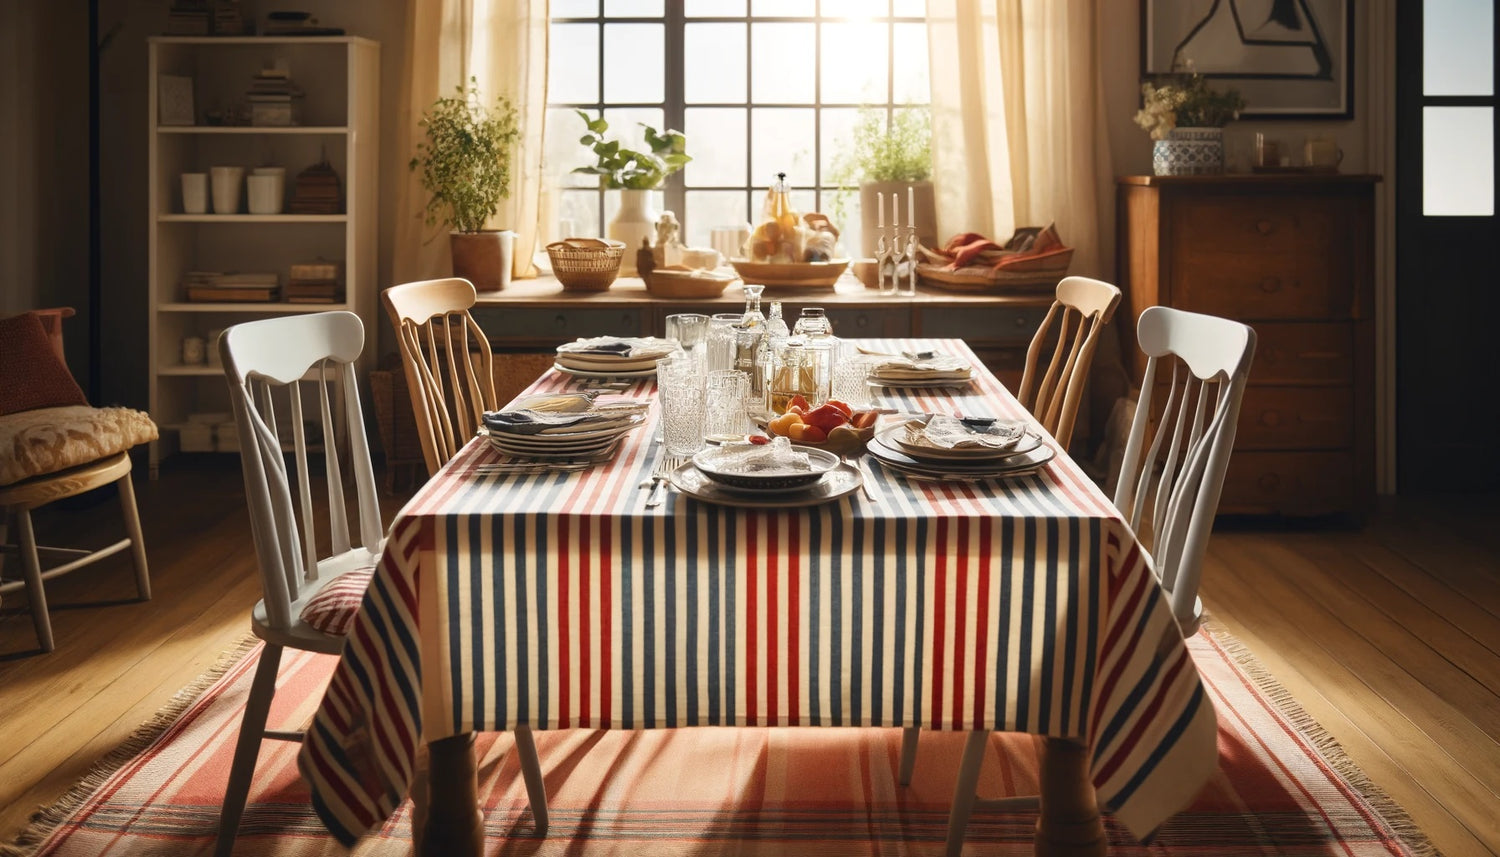 Cozy dining room with a table set for a meal, featuring a bold and colorful striped tablecloth with red, white, and blue stripes, plates, glasses, cutlery, natural light, and potted plants adding a touch of greenery